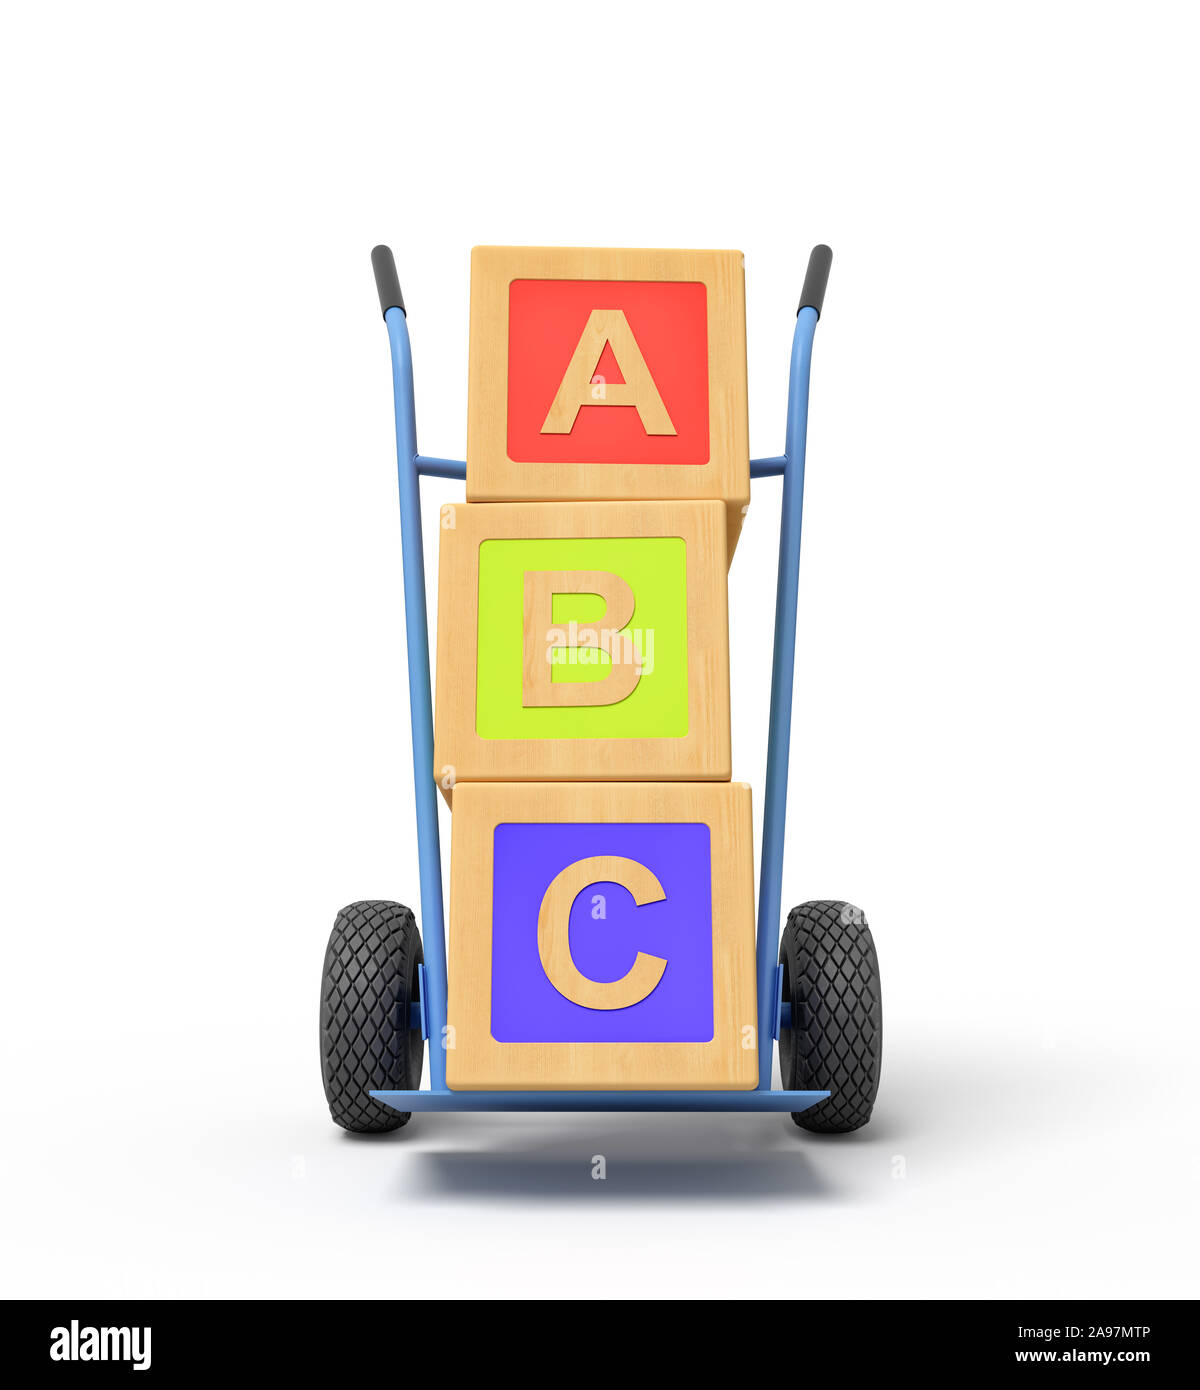 3d rendering of colorful alphabet toy blocks showing 'ABC' sign on a hand truck Stock Photo